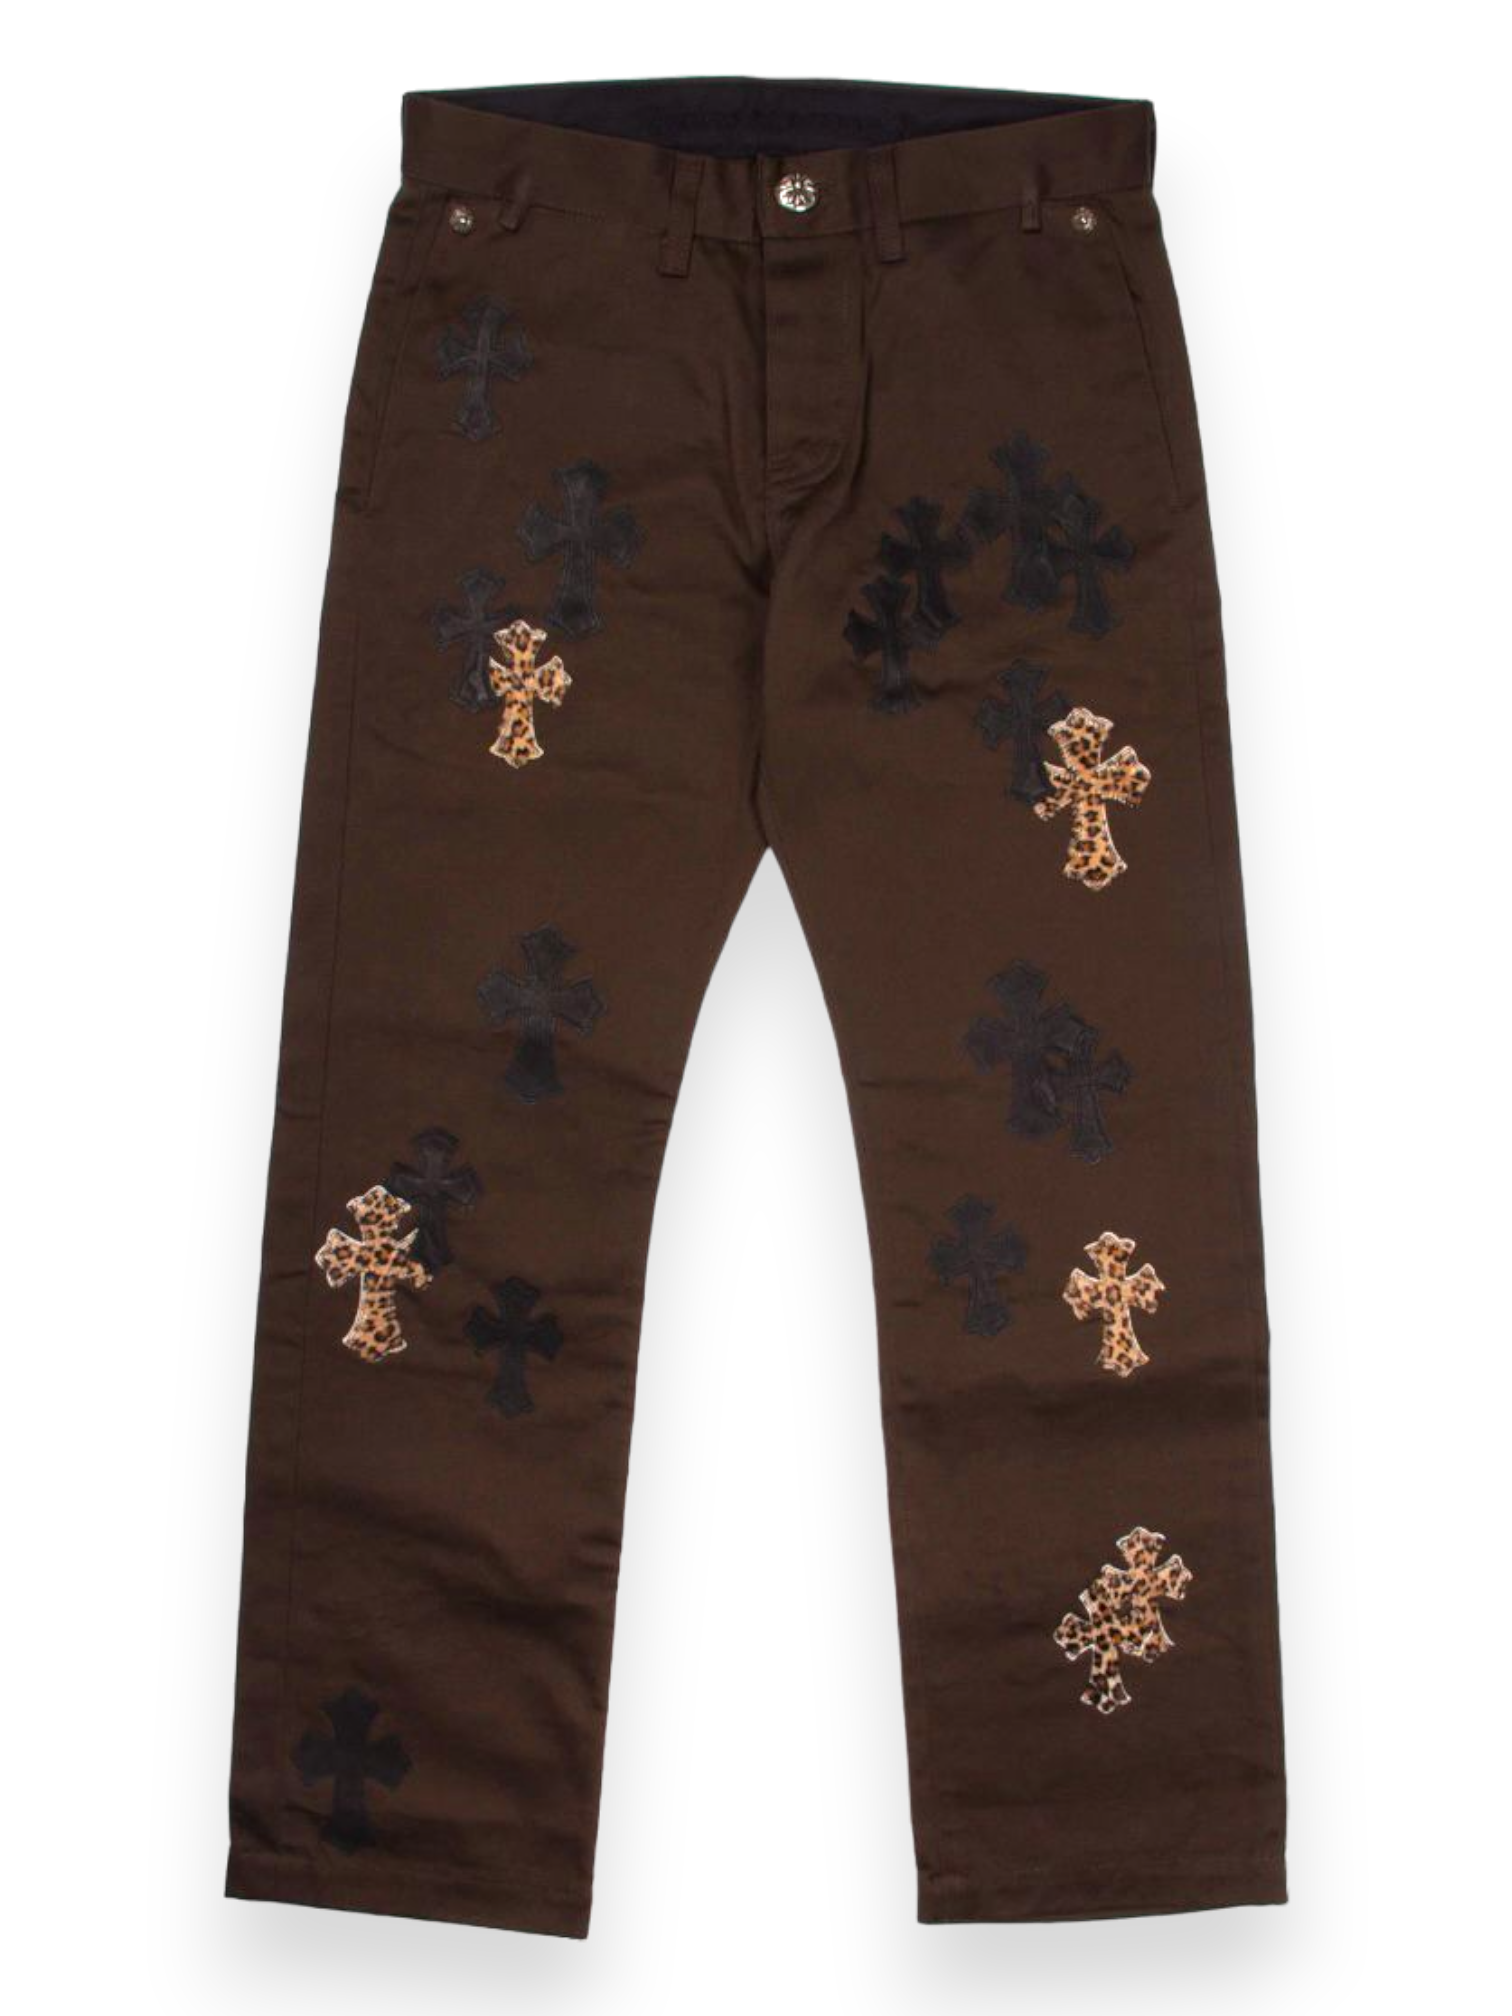 Chrome Hearts Leopard Black Cross Patch Brown Chinos